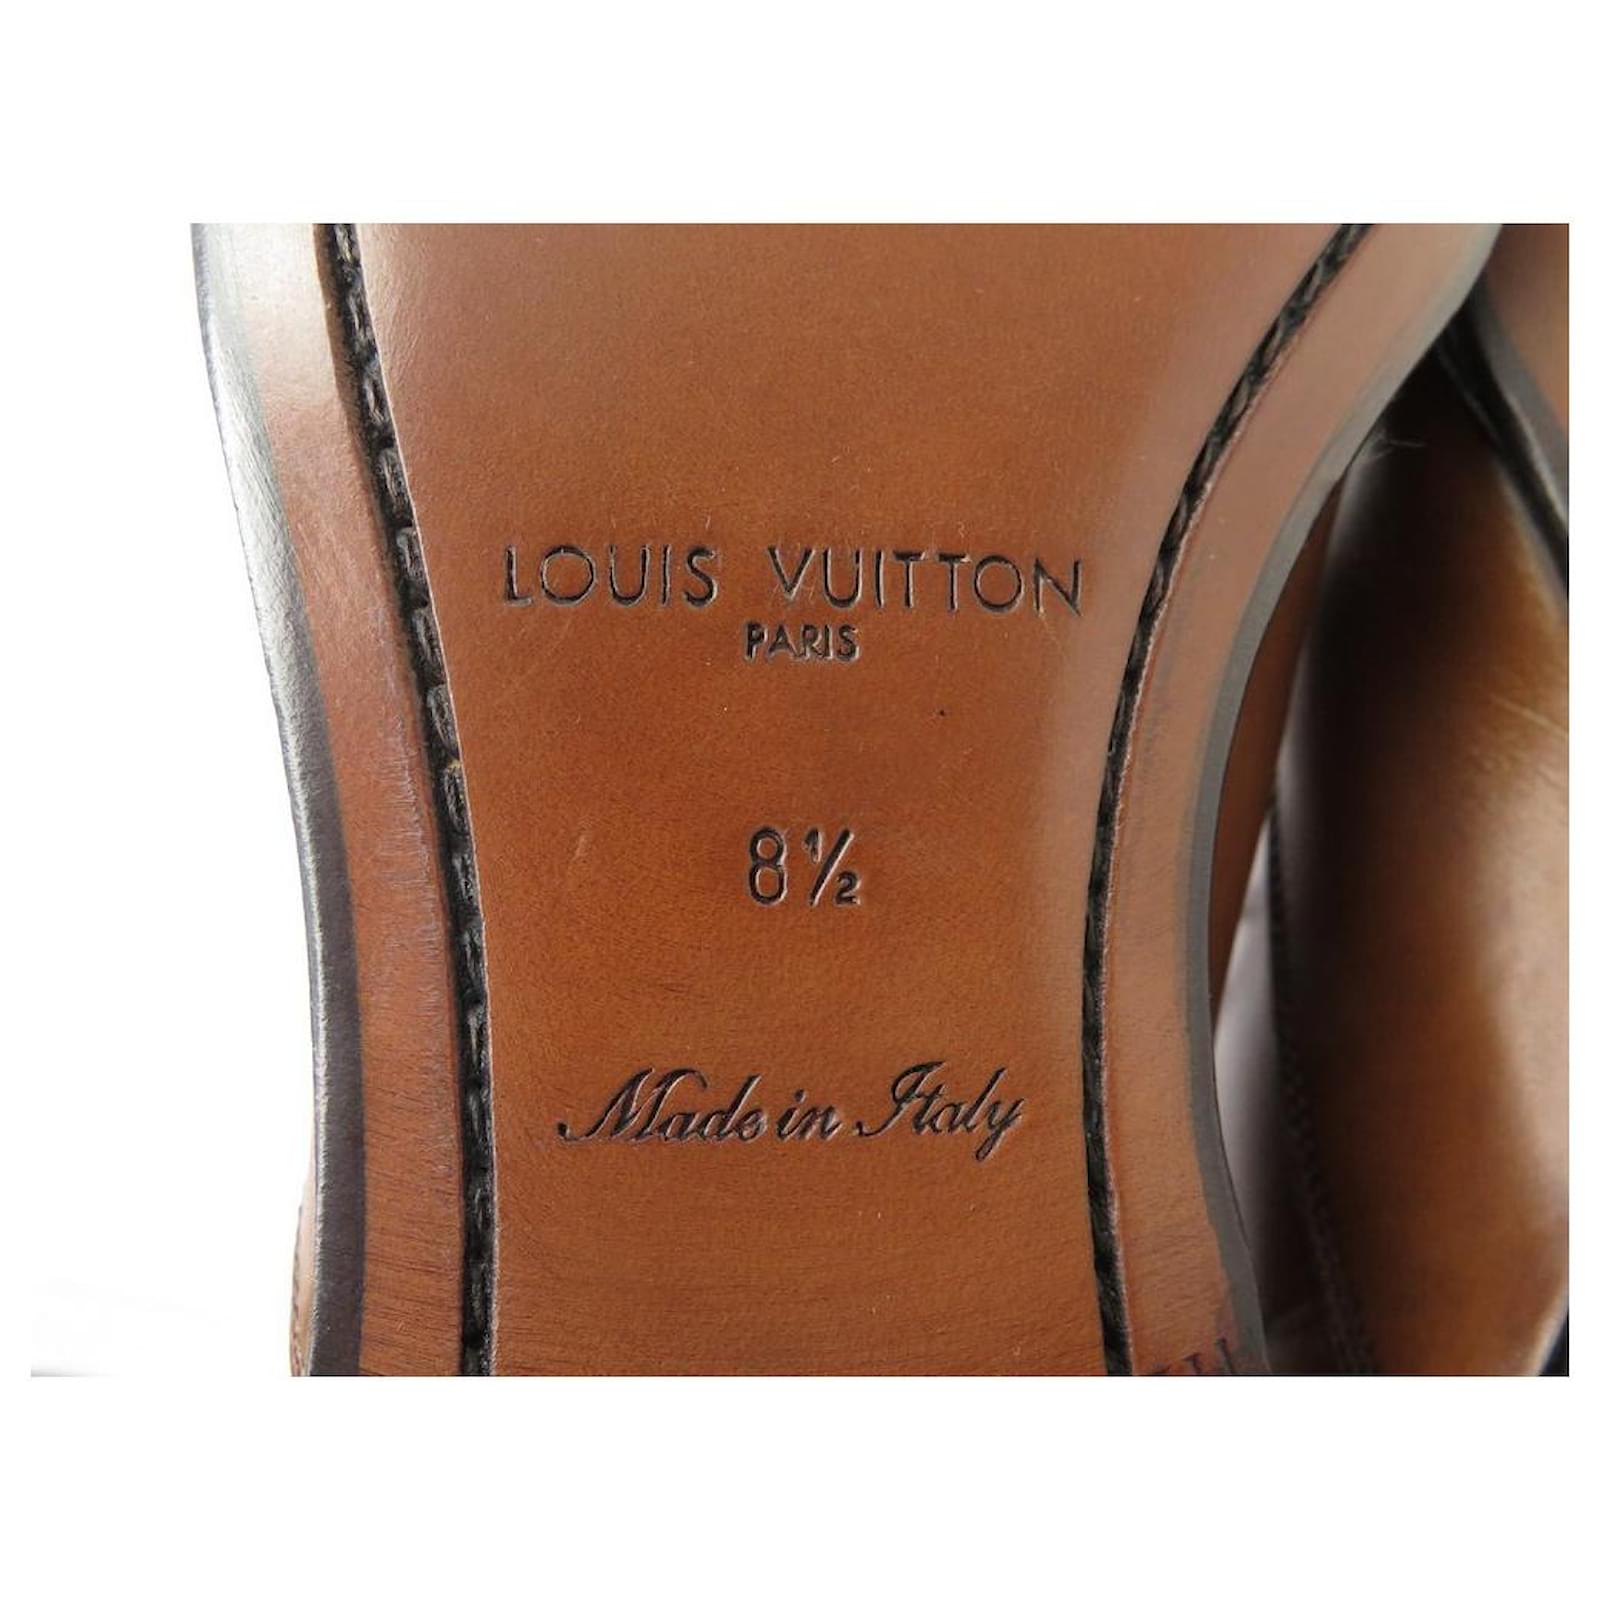 NEW LOUIS VUITTON DERBY MAYFLOWER SHOES 8.5 42.5 BROWN LEATHER +